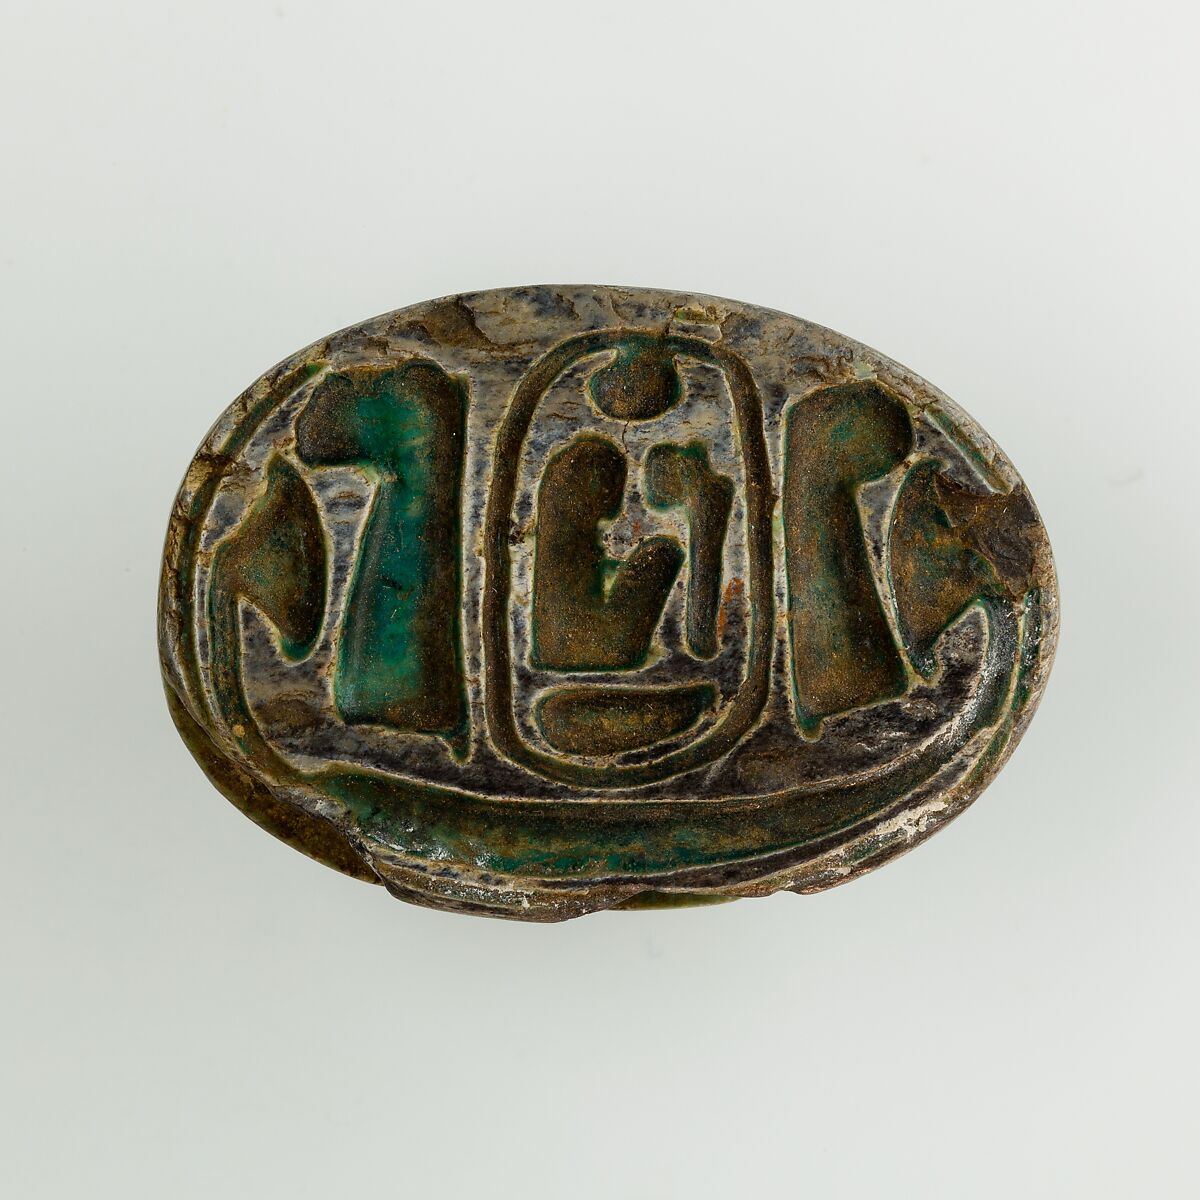 Scarab with cartouche of Usermaatre, Glazed steatite 